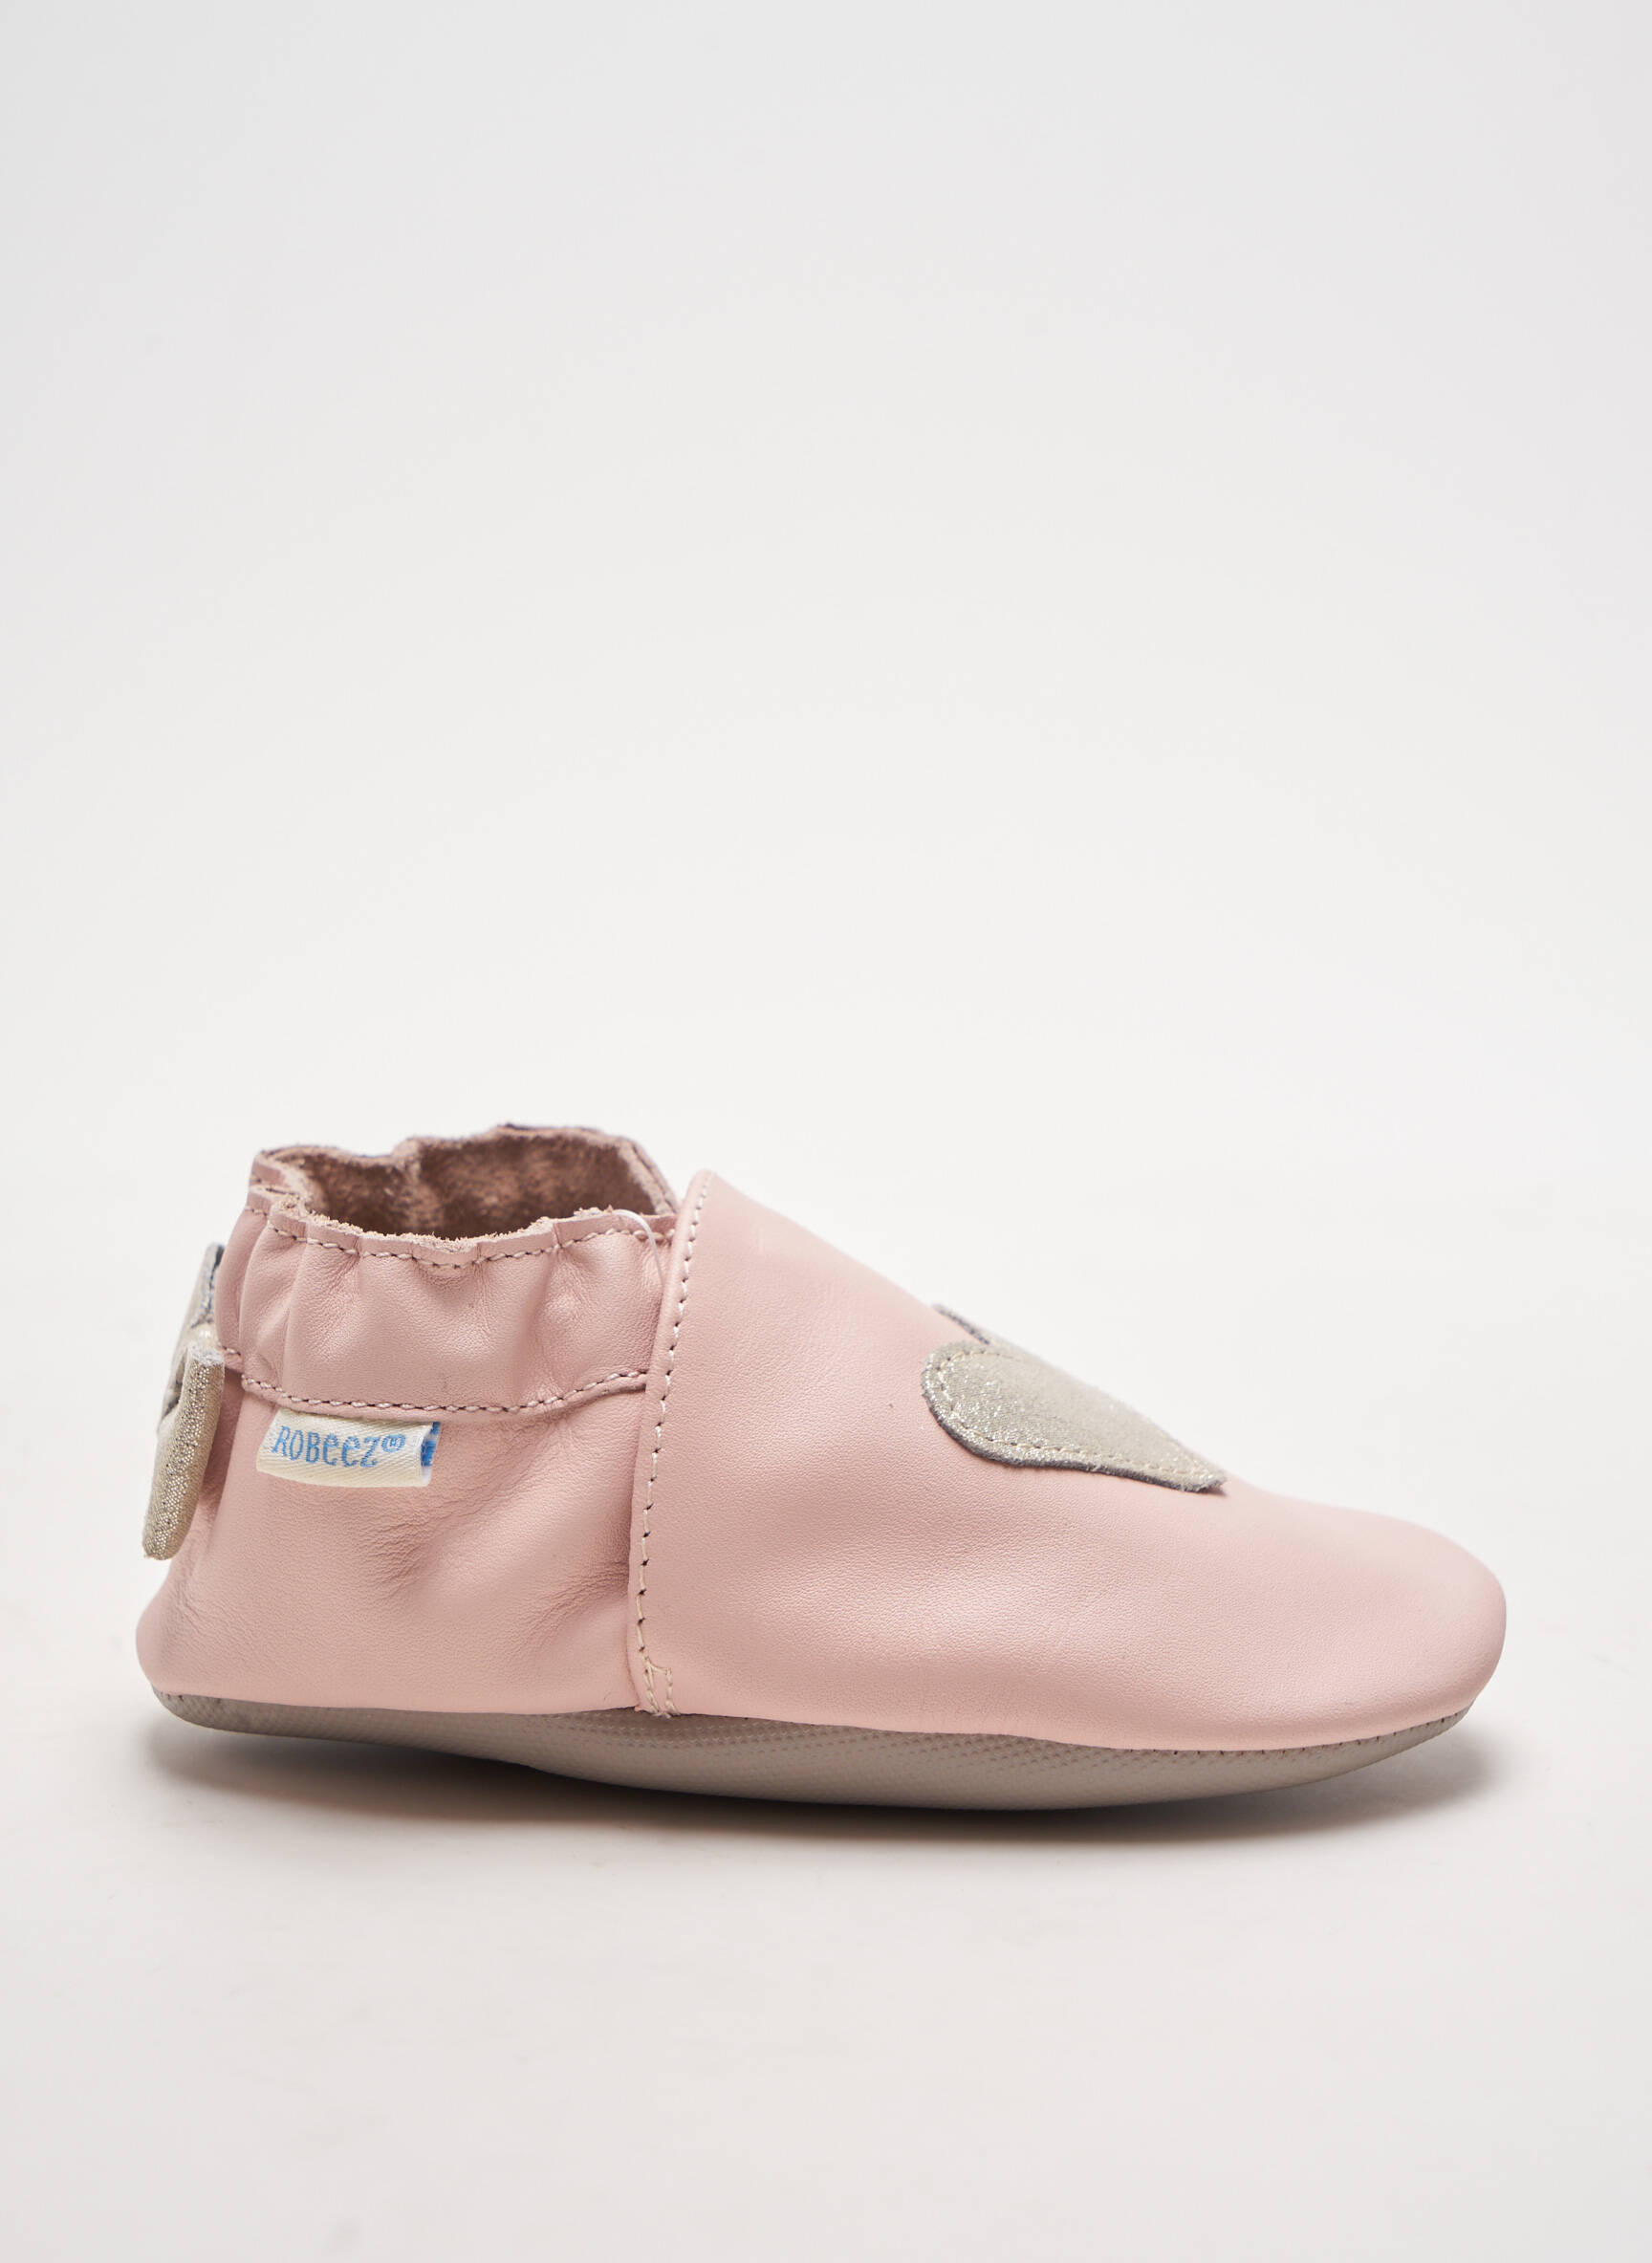 Robeez chausson rose fille